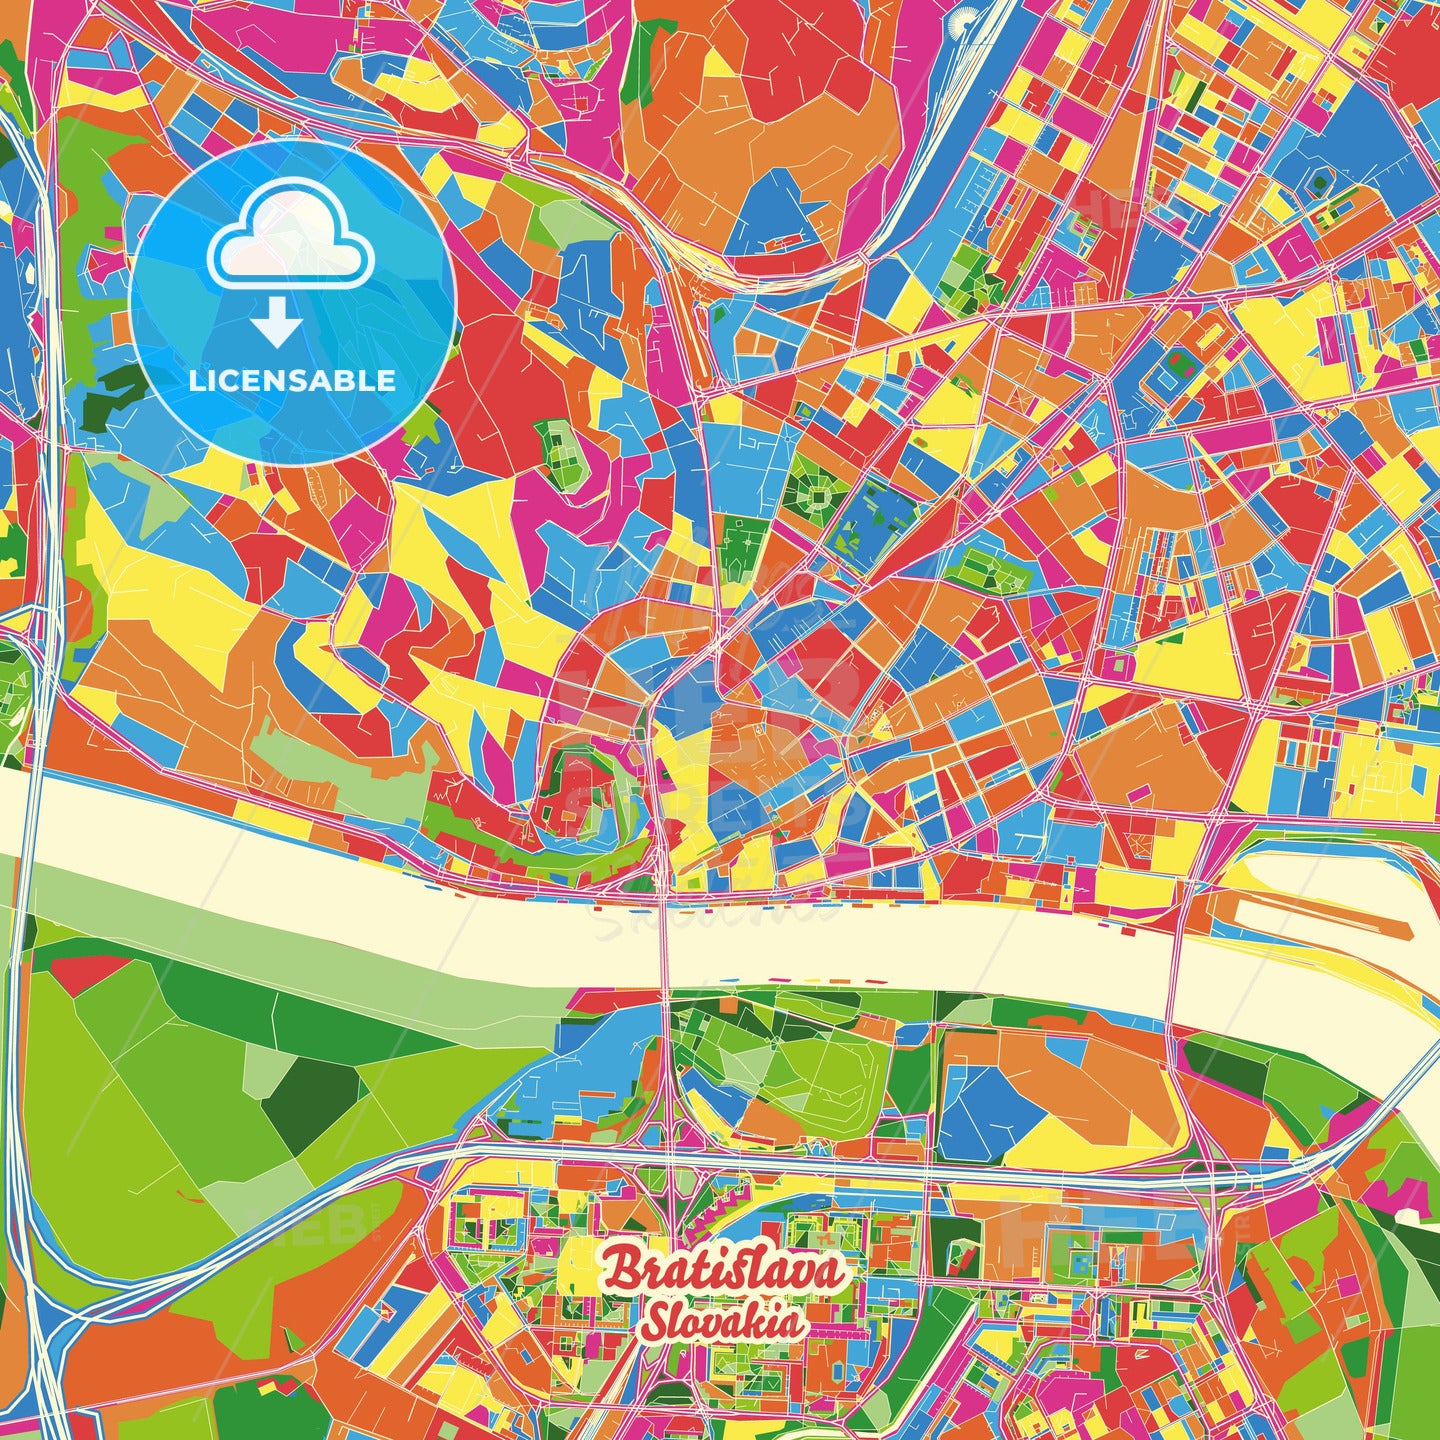 Bratislava, Slovakia Crazy Colorful Street Map Poster Template - HEBSTREITS Sketches